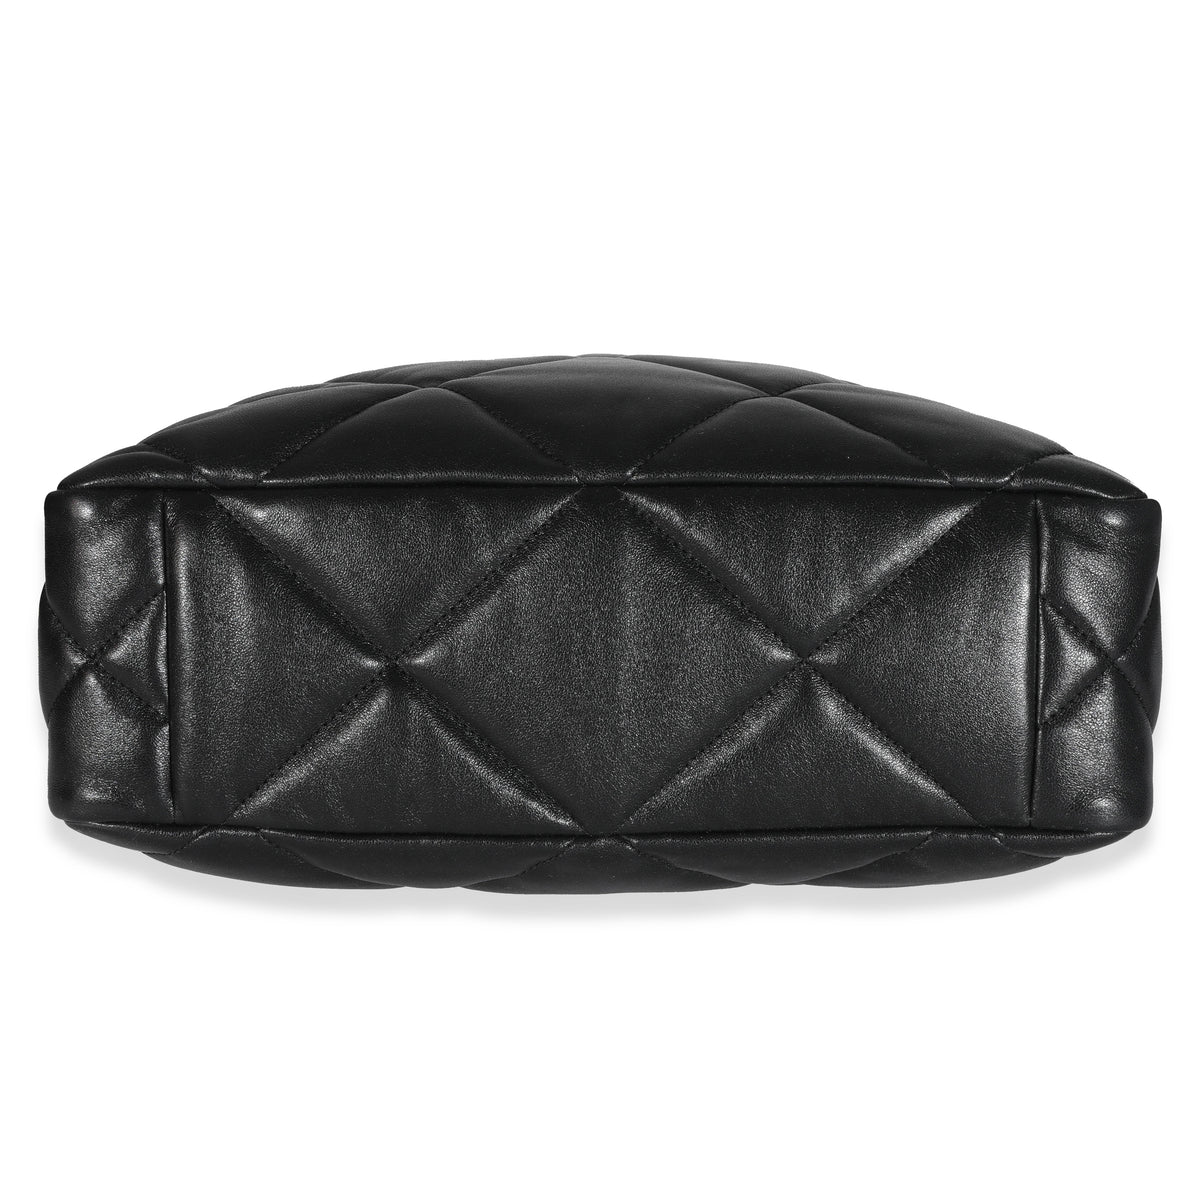 Chanel Black Lambskin Quilted Chanel 19 O Case, myGemma